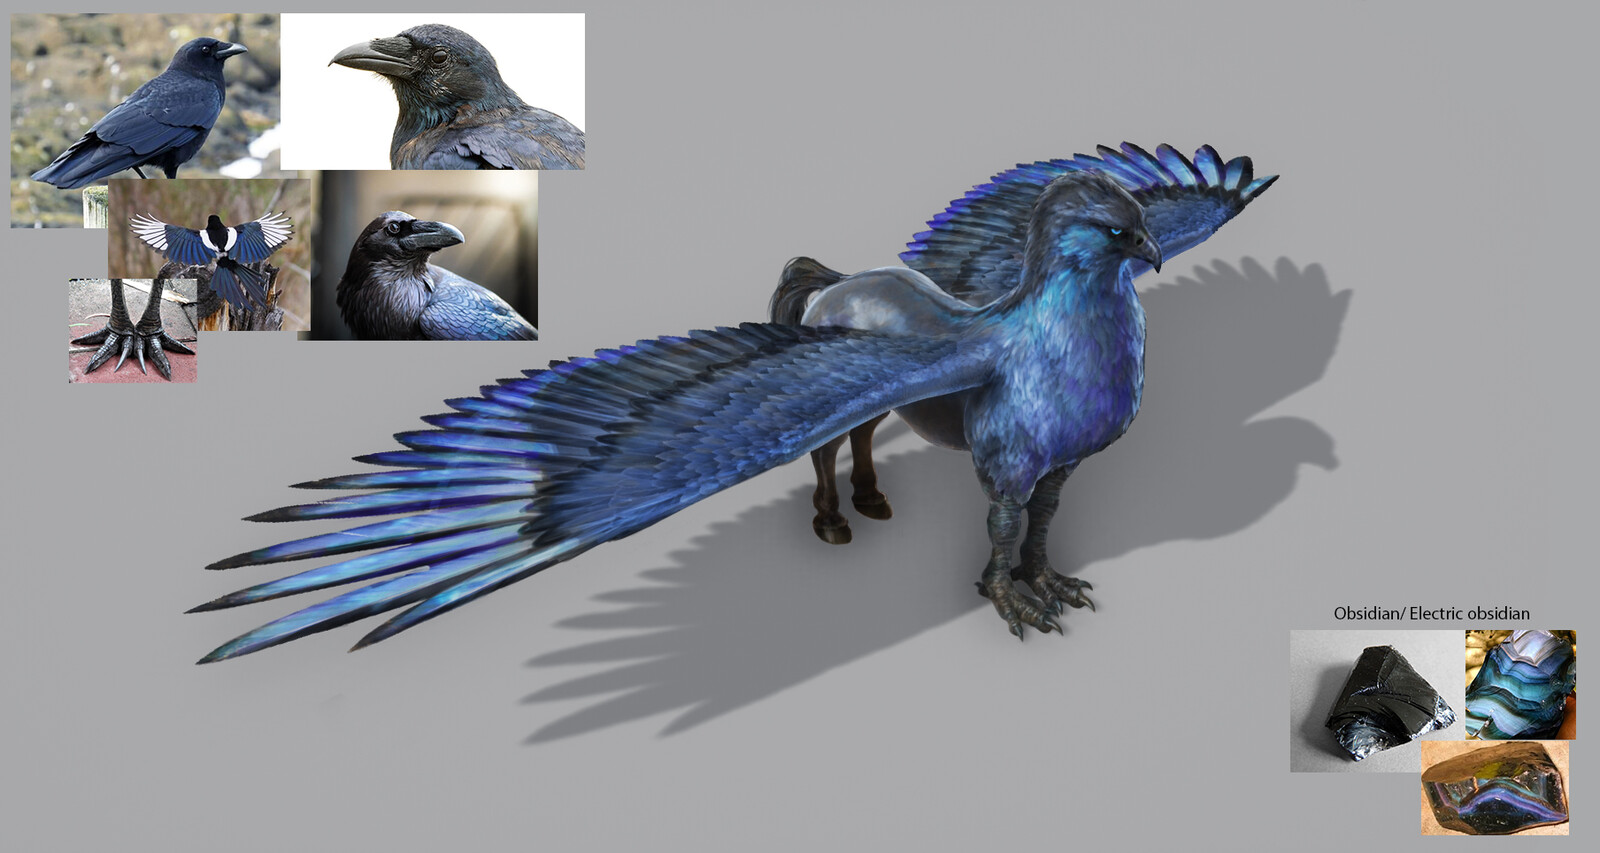 Concept 2 - Playing with some designs on the hippogriff, referencing the Magpie.